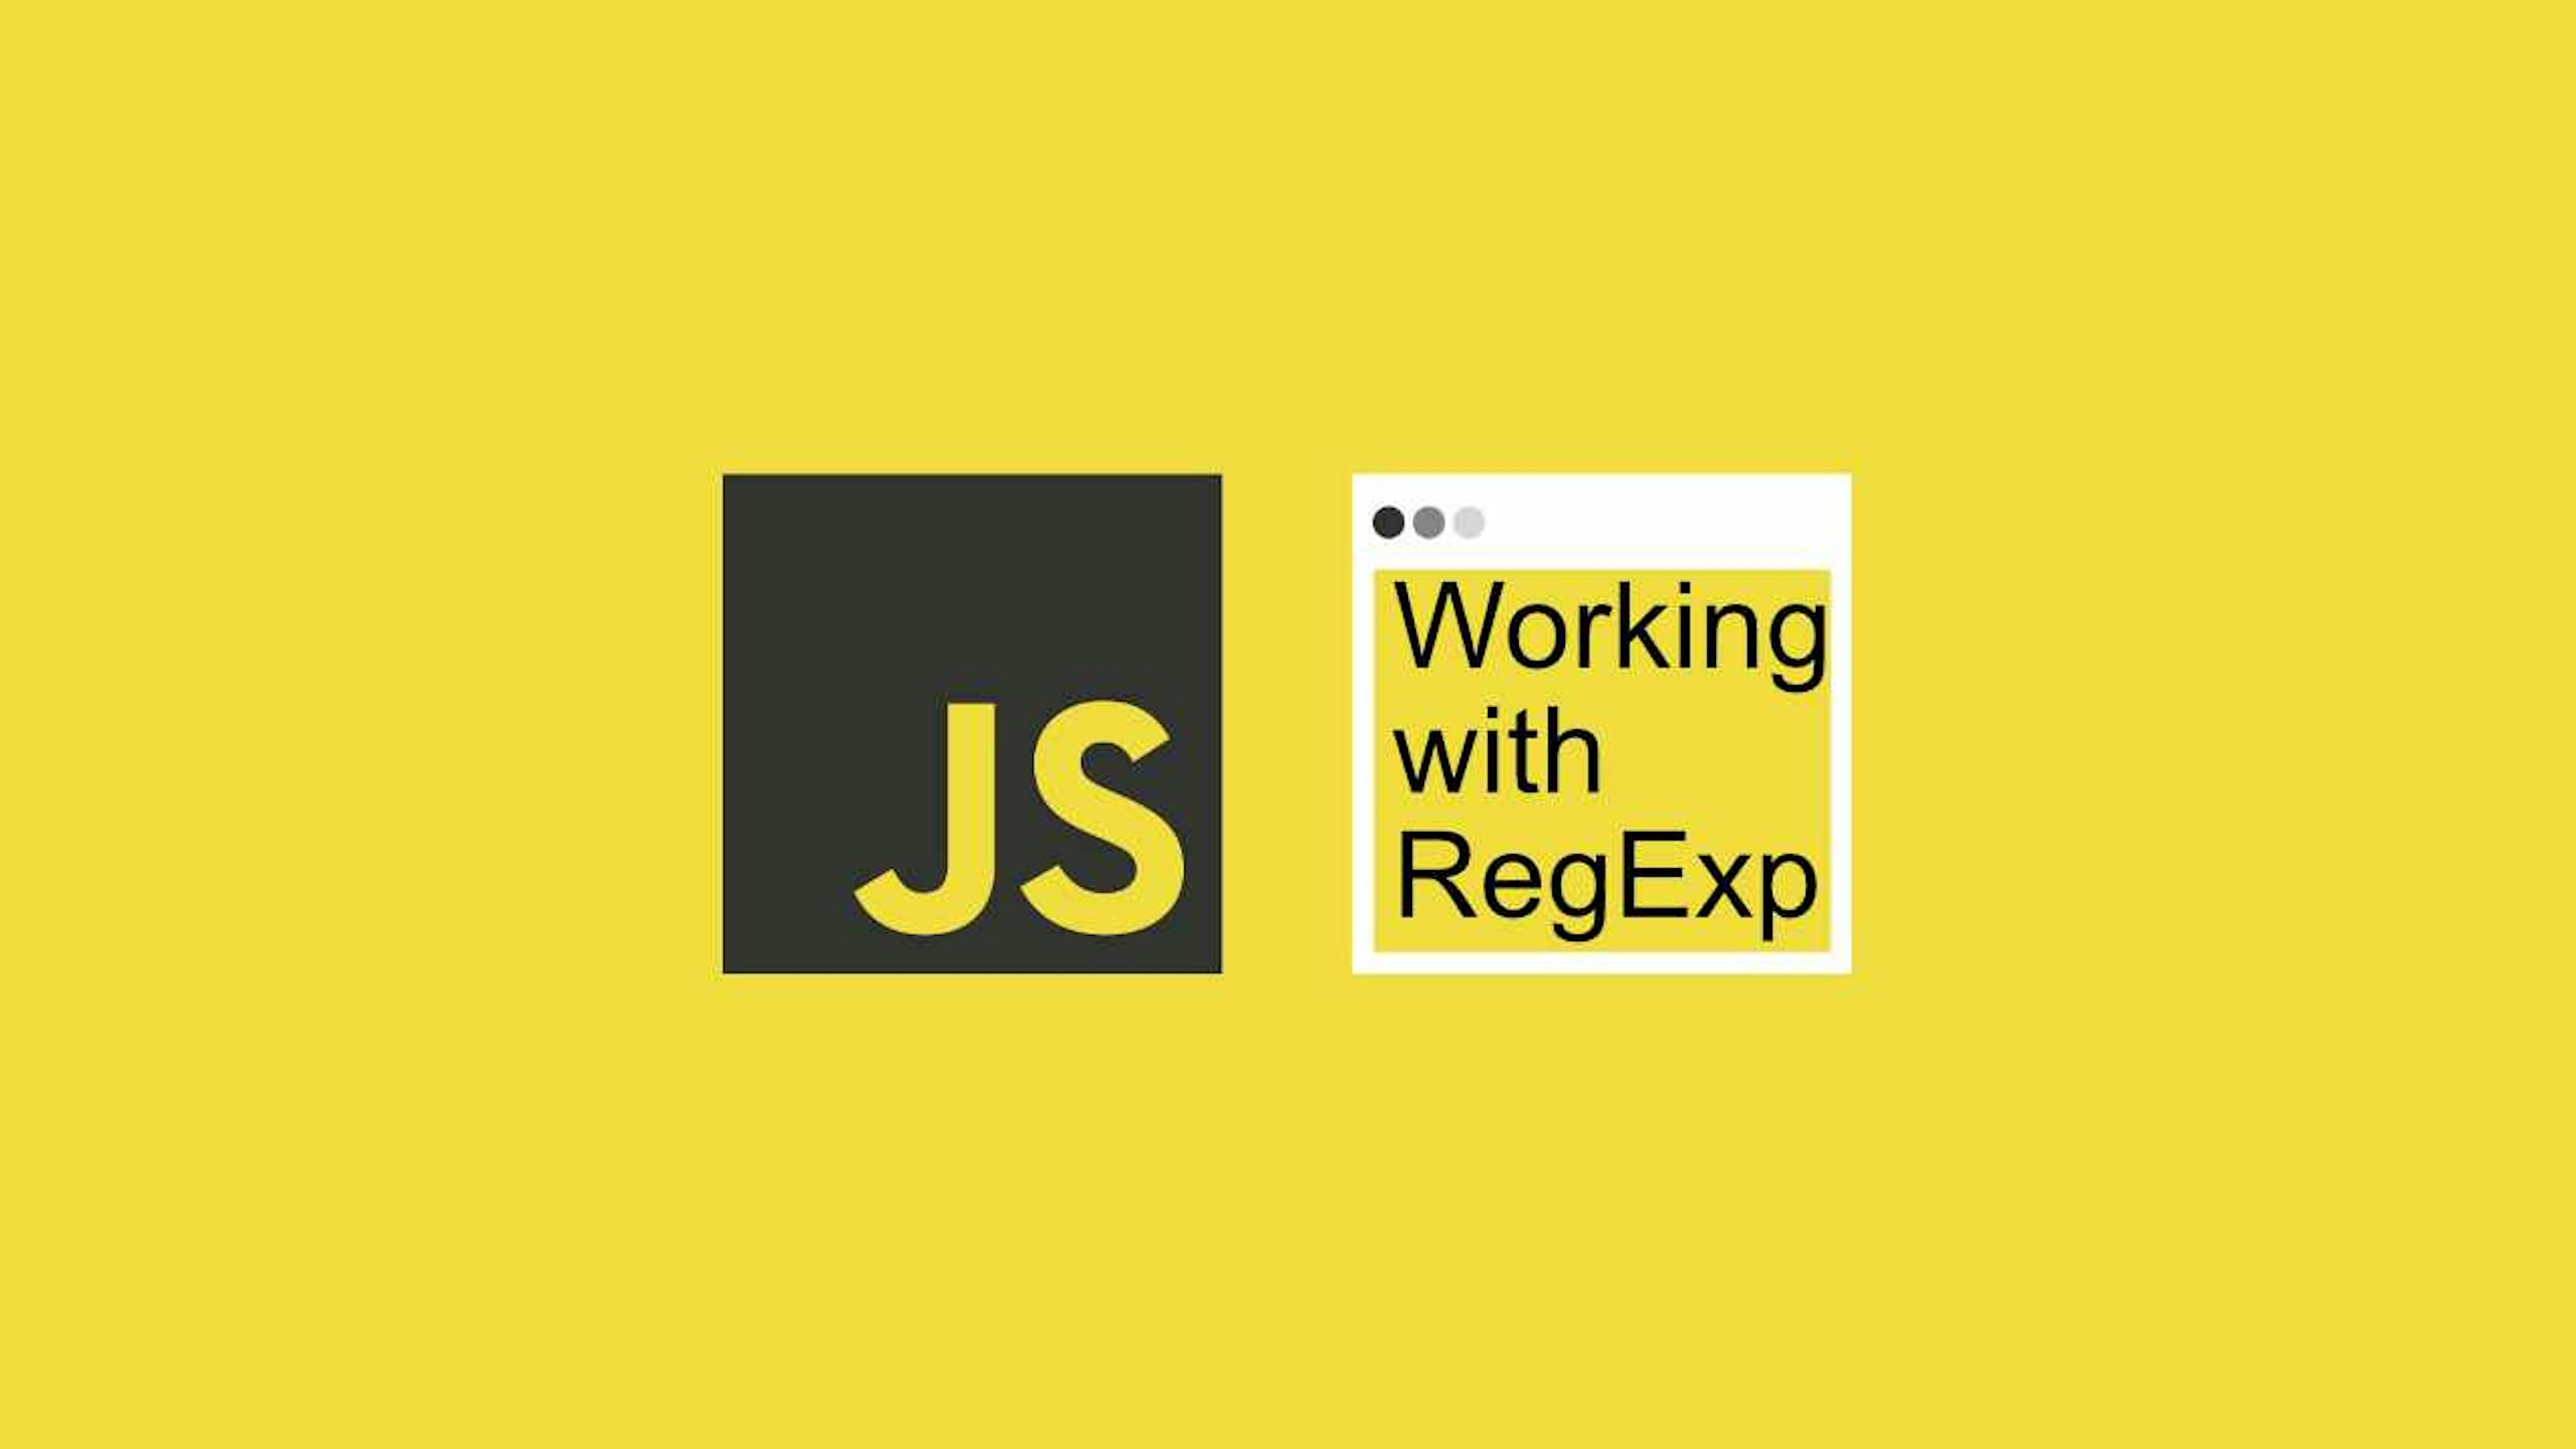 Working with Regulars Expressions (RegExp) in JavaScript: Features and Practical Examples